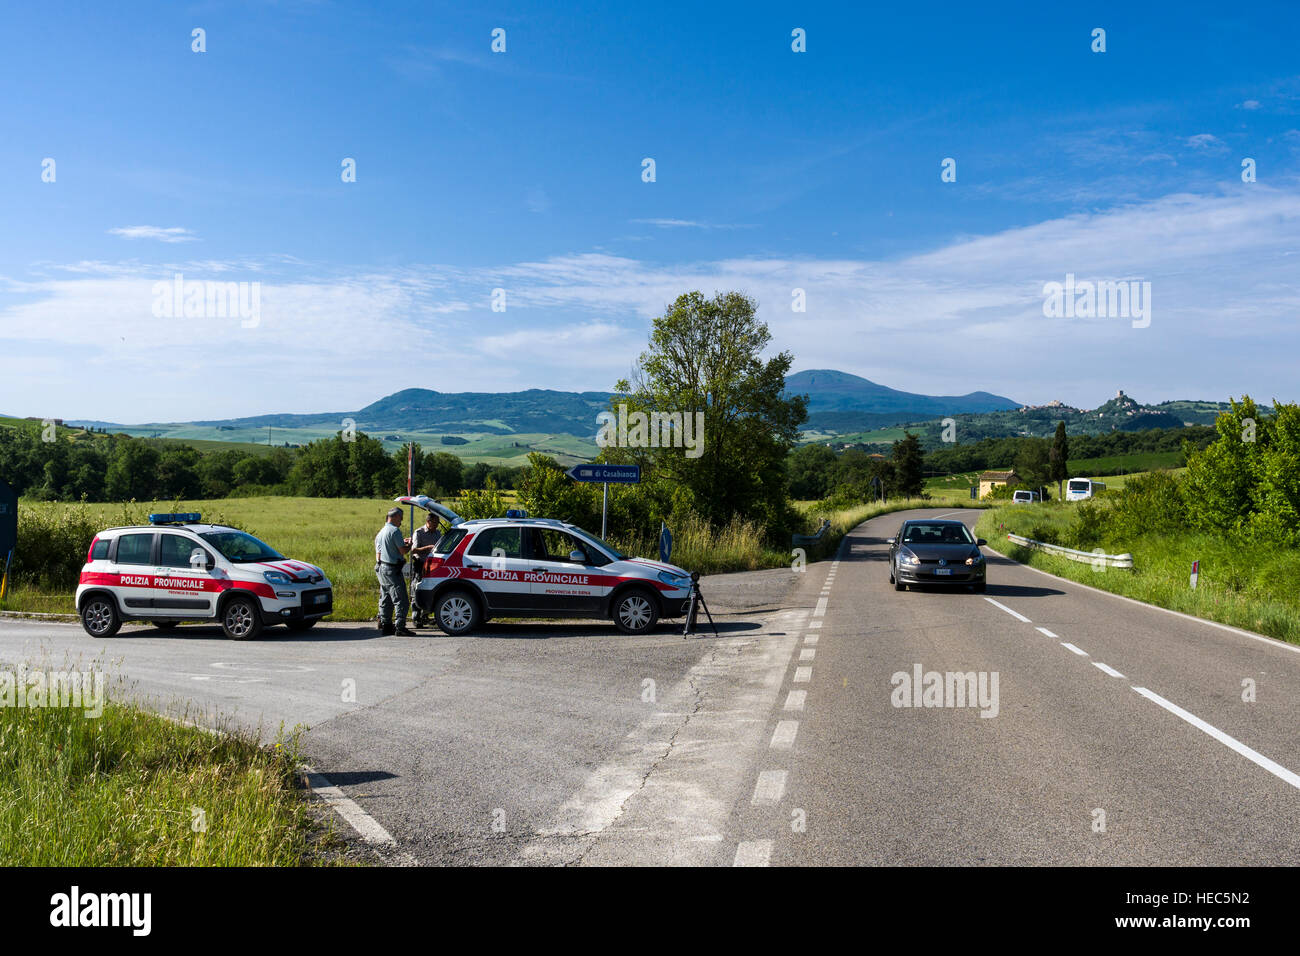 The police is setting up a radar control on a road in Val d’Orcia Stock Photo